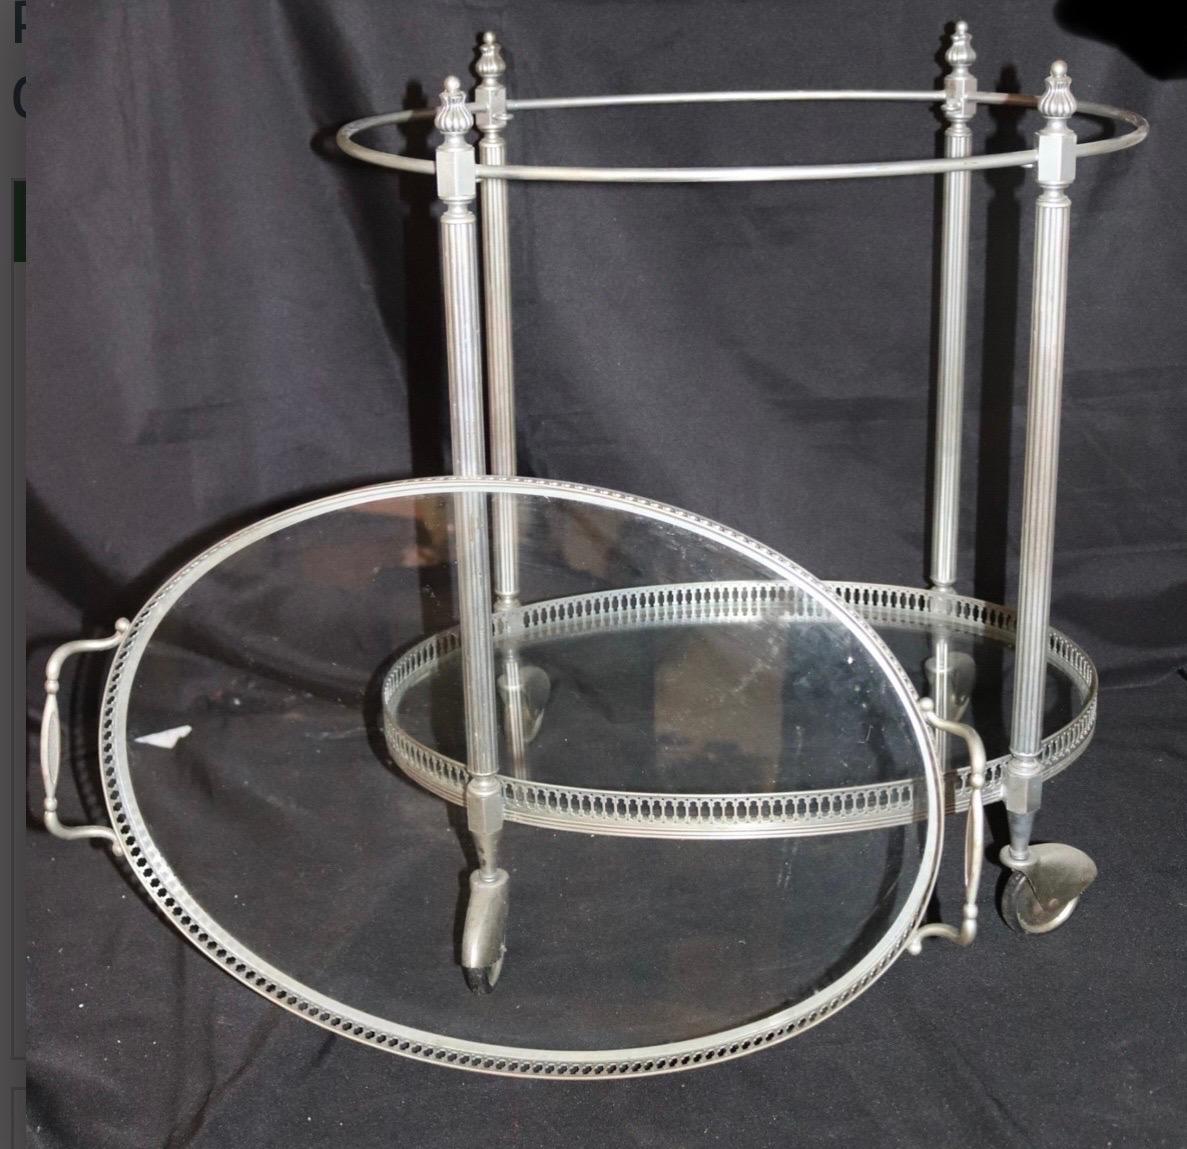 A wonderful French neoclassic style 2 tier nickel plated oval bar cart with inset glass shelves and removal gallery tray top. The nickel plating is in good overall condition. High quality workmanship throughout including refined delicate gallery